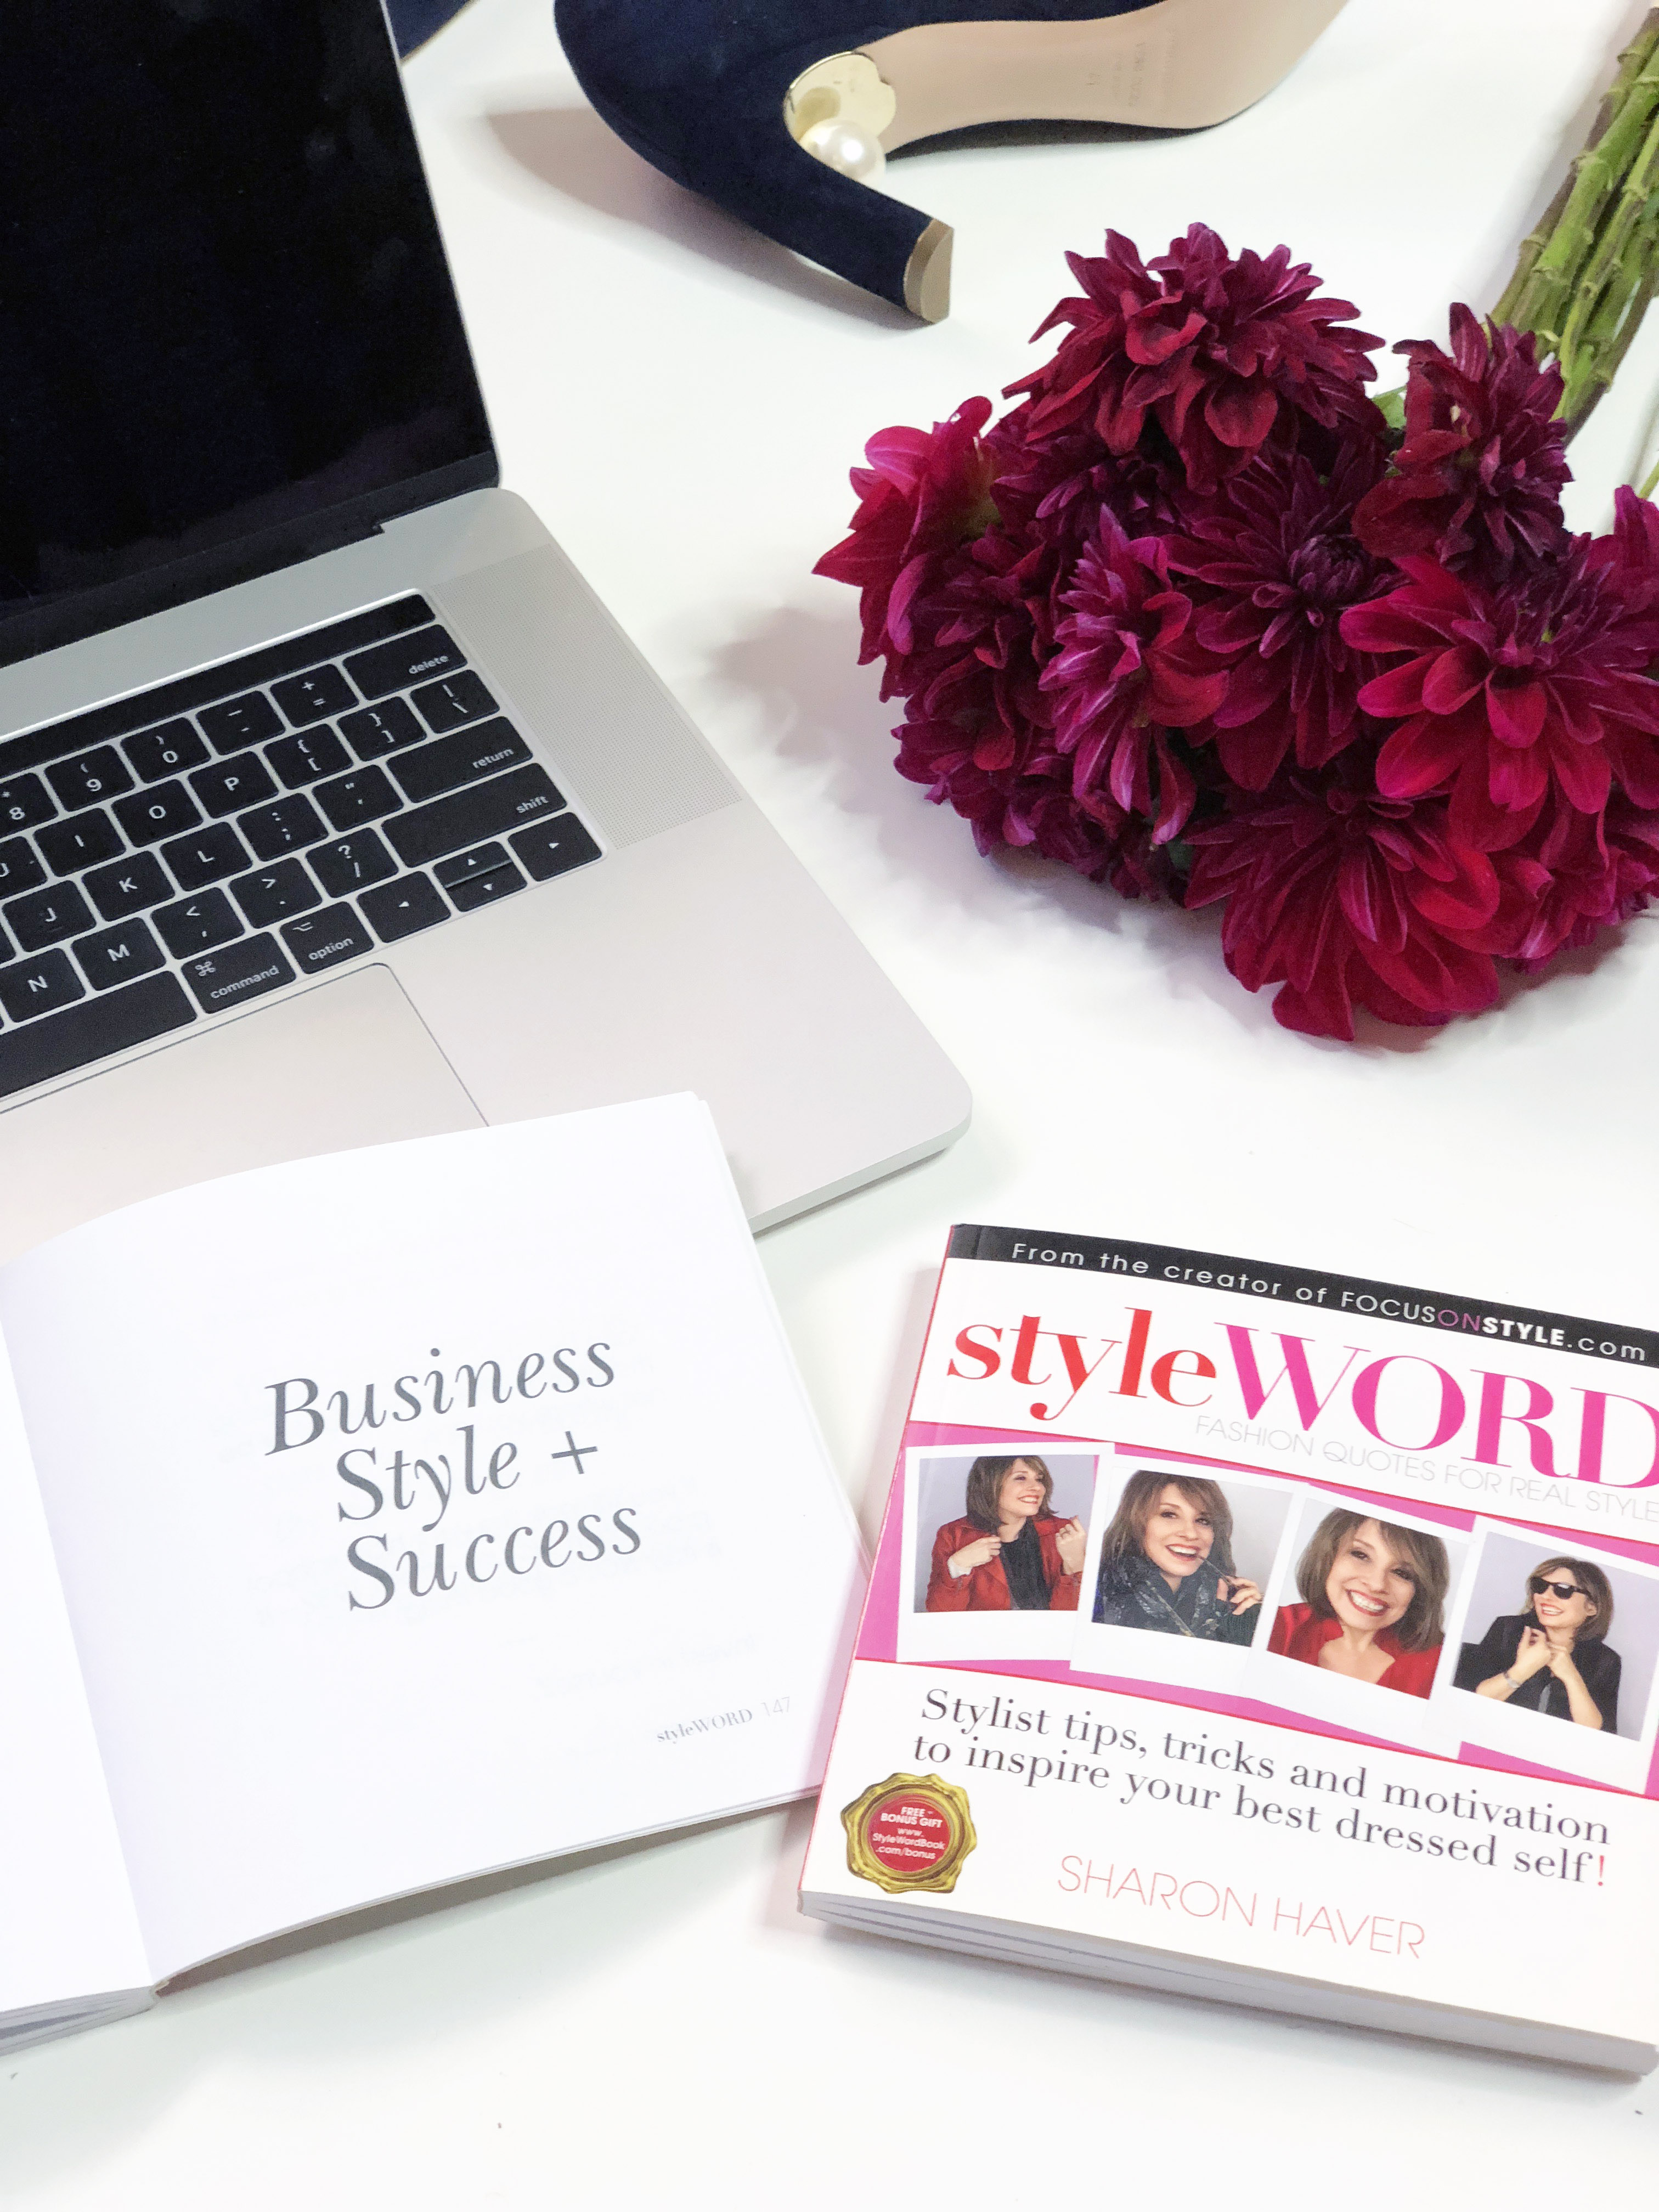 Styleword (business and style success)